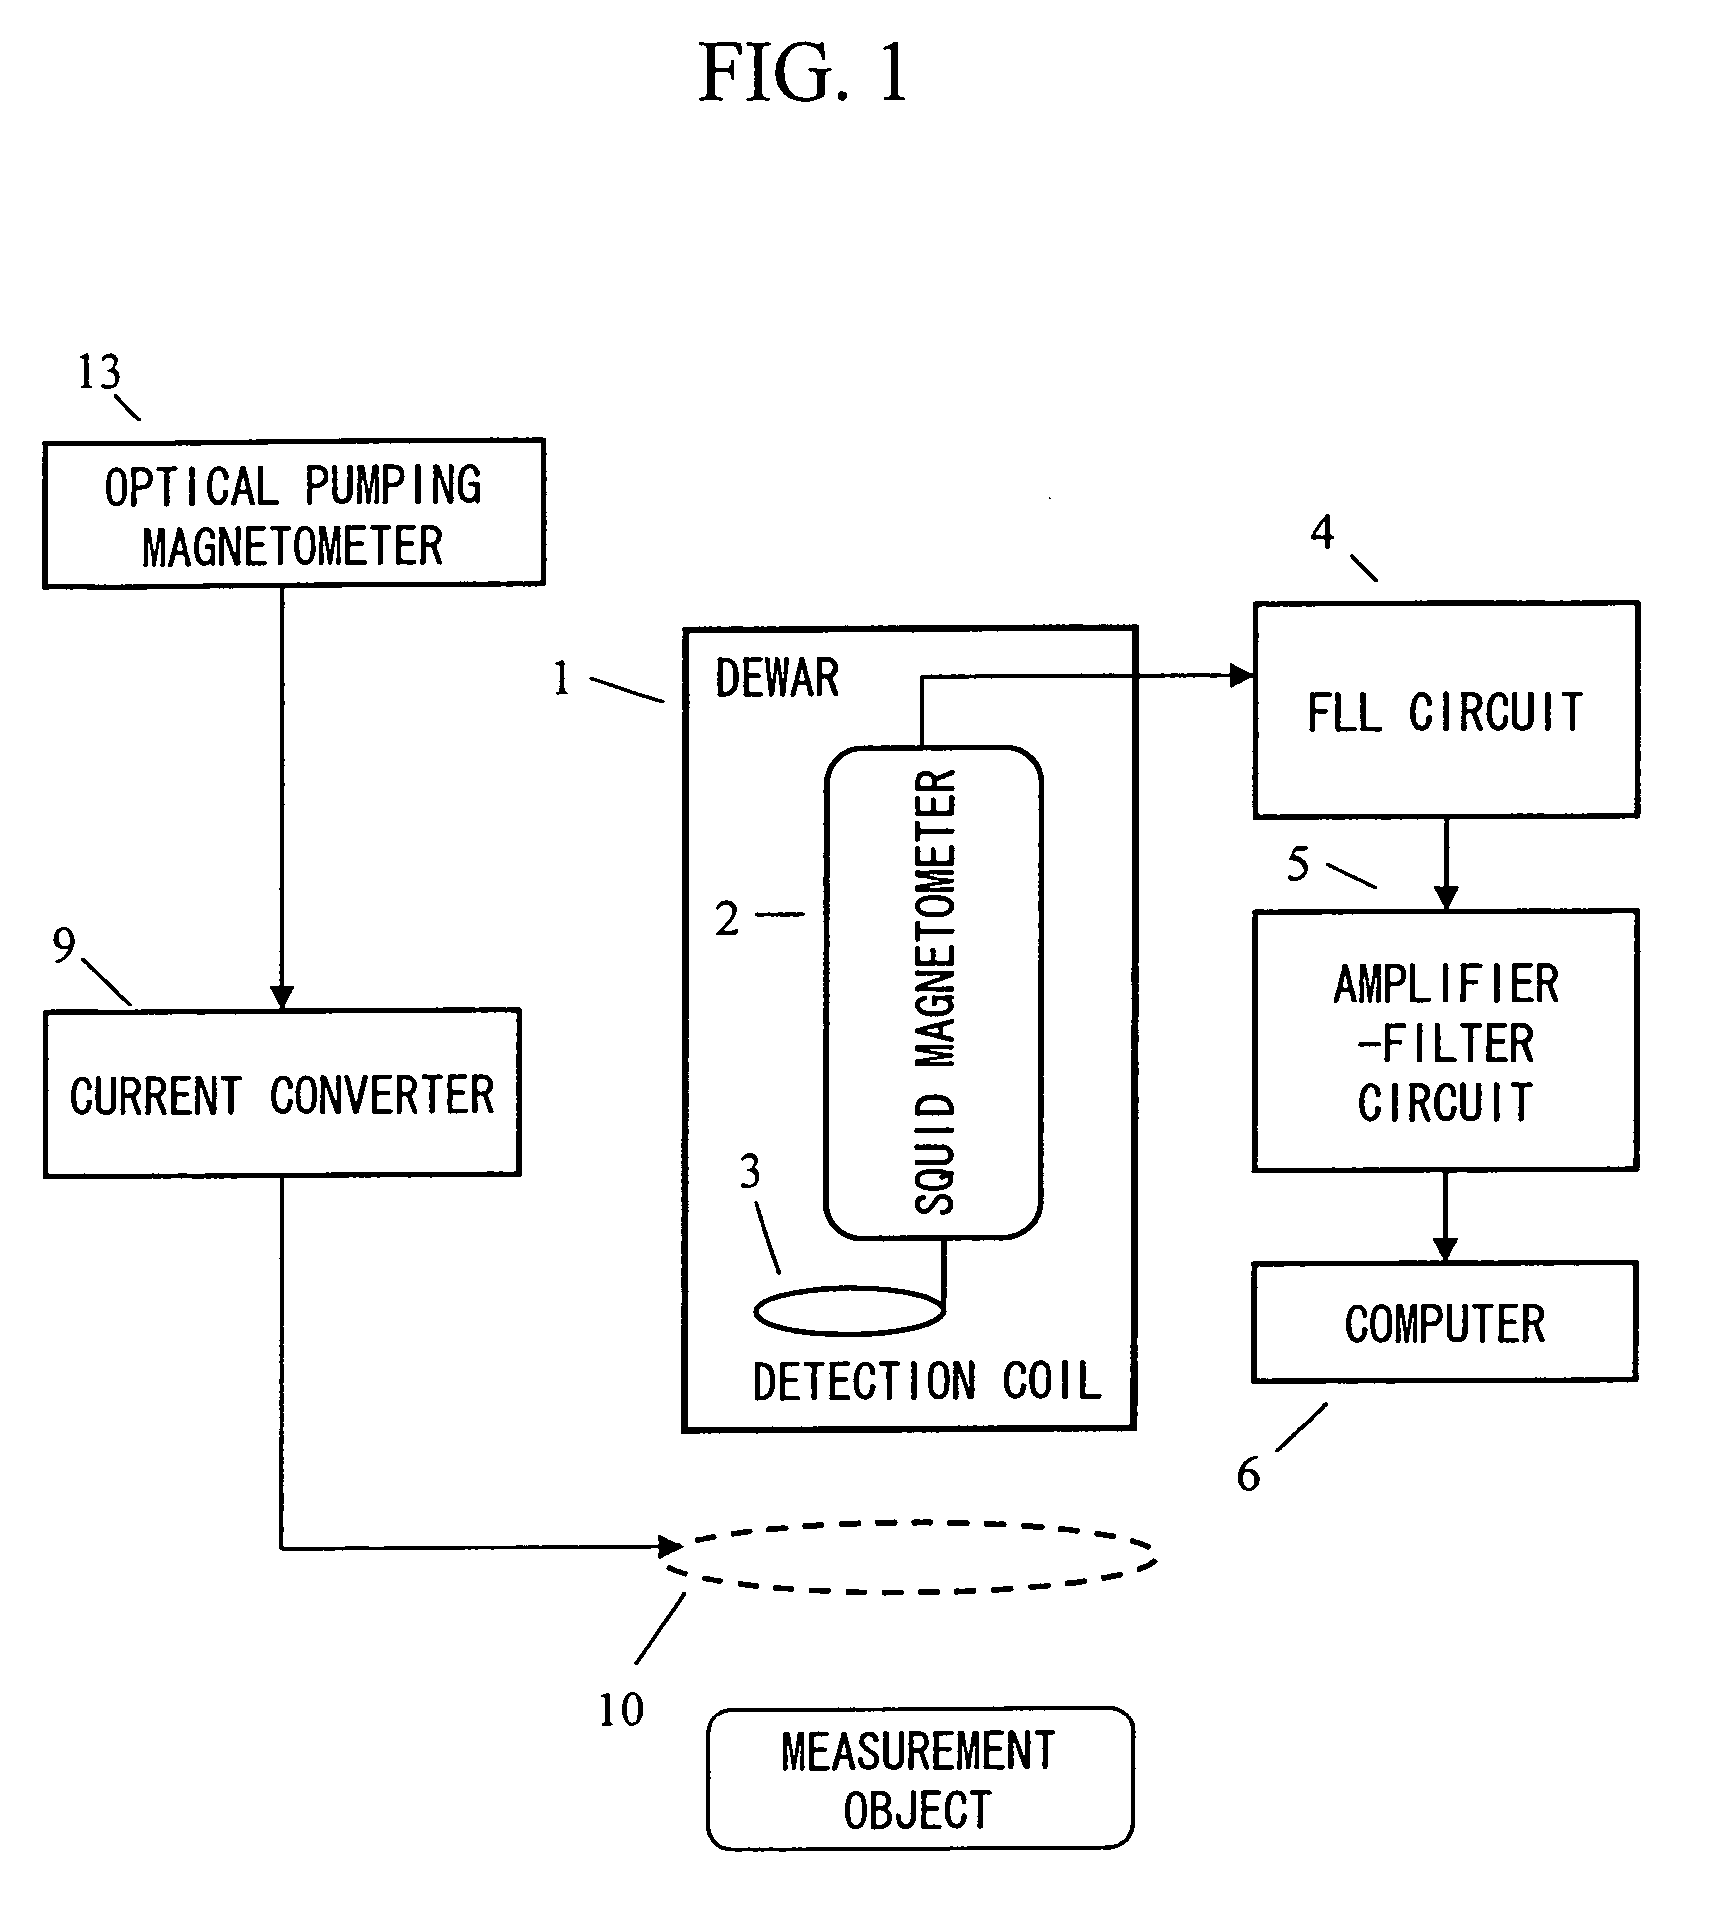 Magnetic field measurement system and optical pumping magnetometer